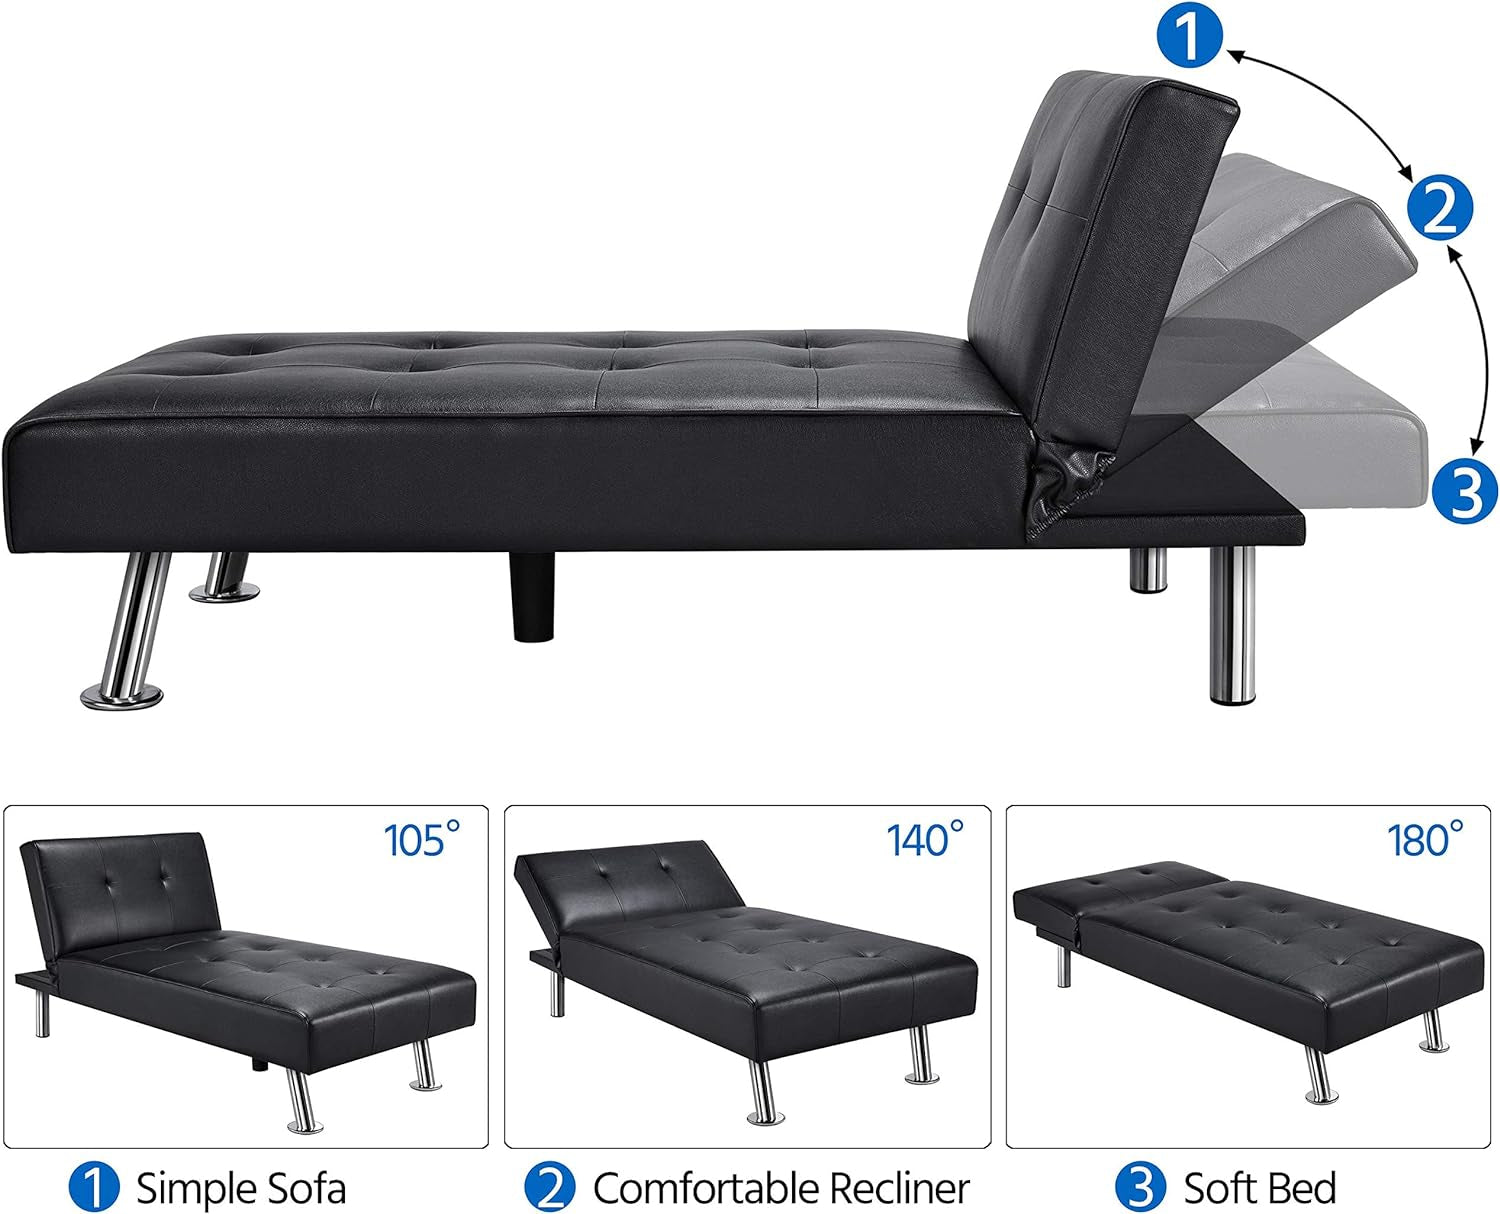 Faux Leather Sofa Bed Sleeper Convertible Futon Sofa Modern Recliner Couch Daybed with Chrome Metal Legs for Living Room Black